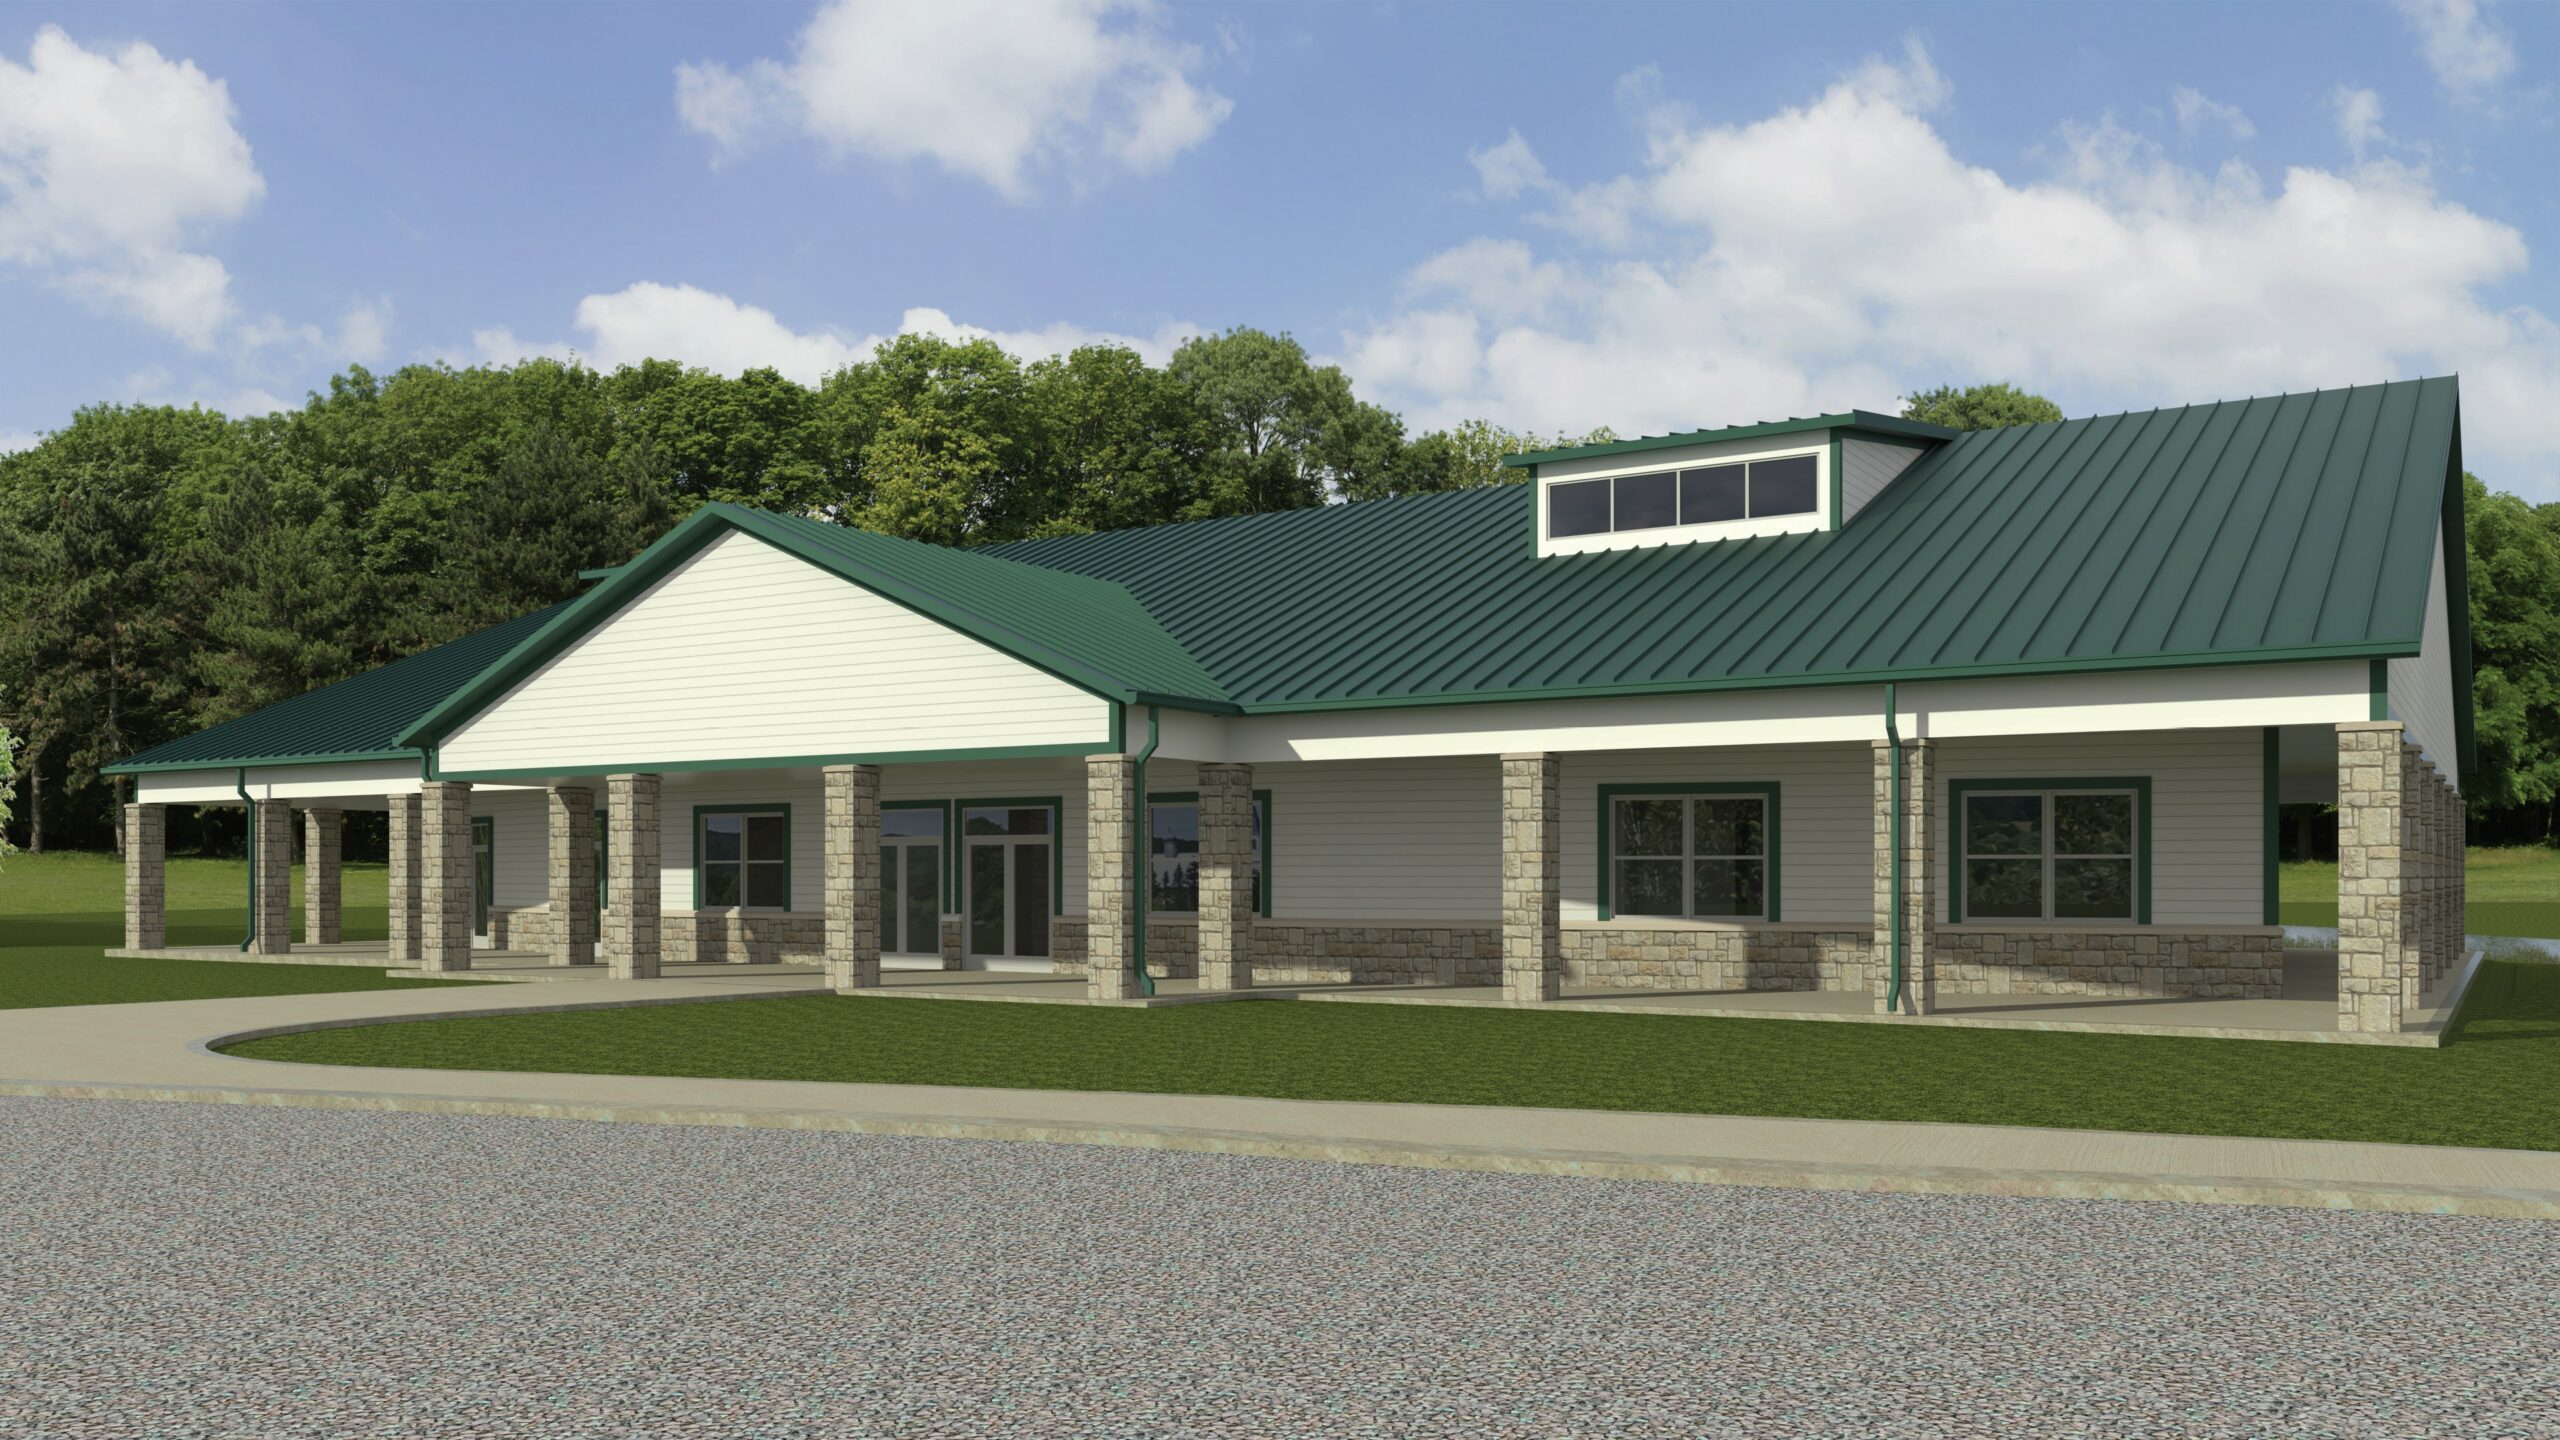 Rendering of an white, green, and stone education building